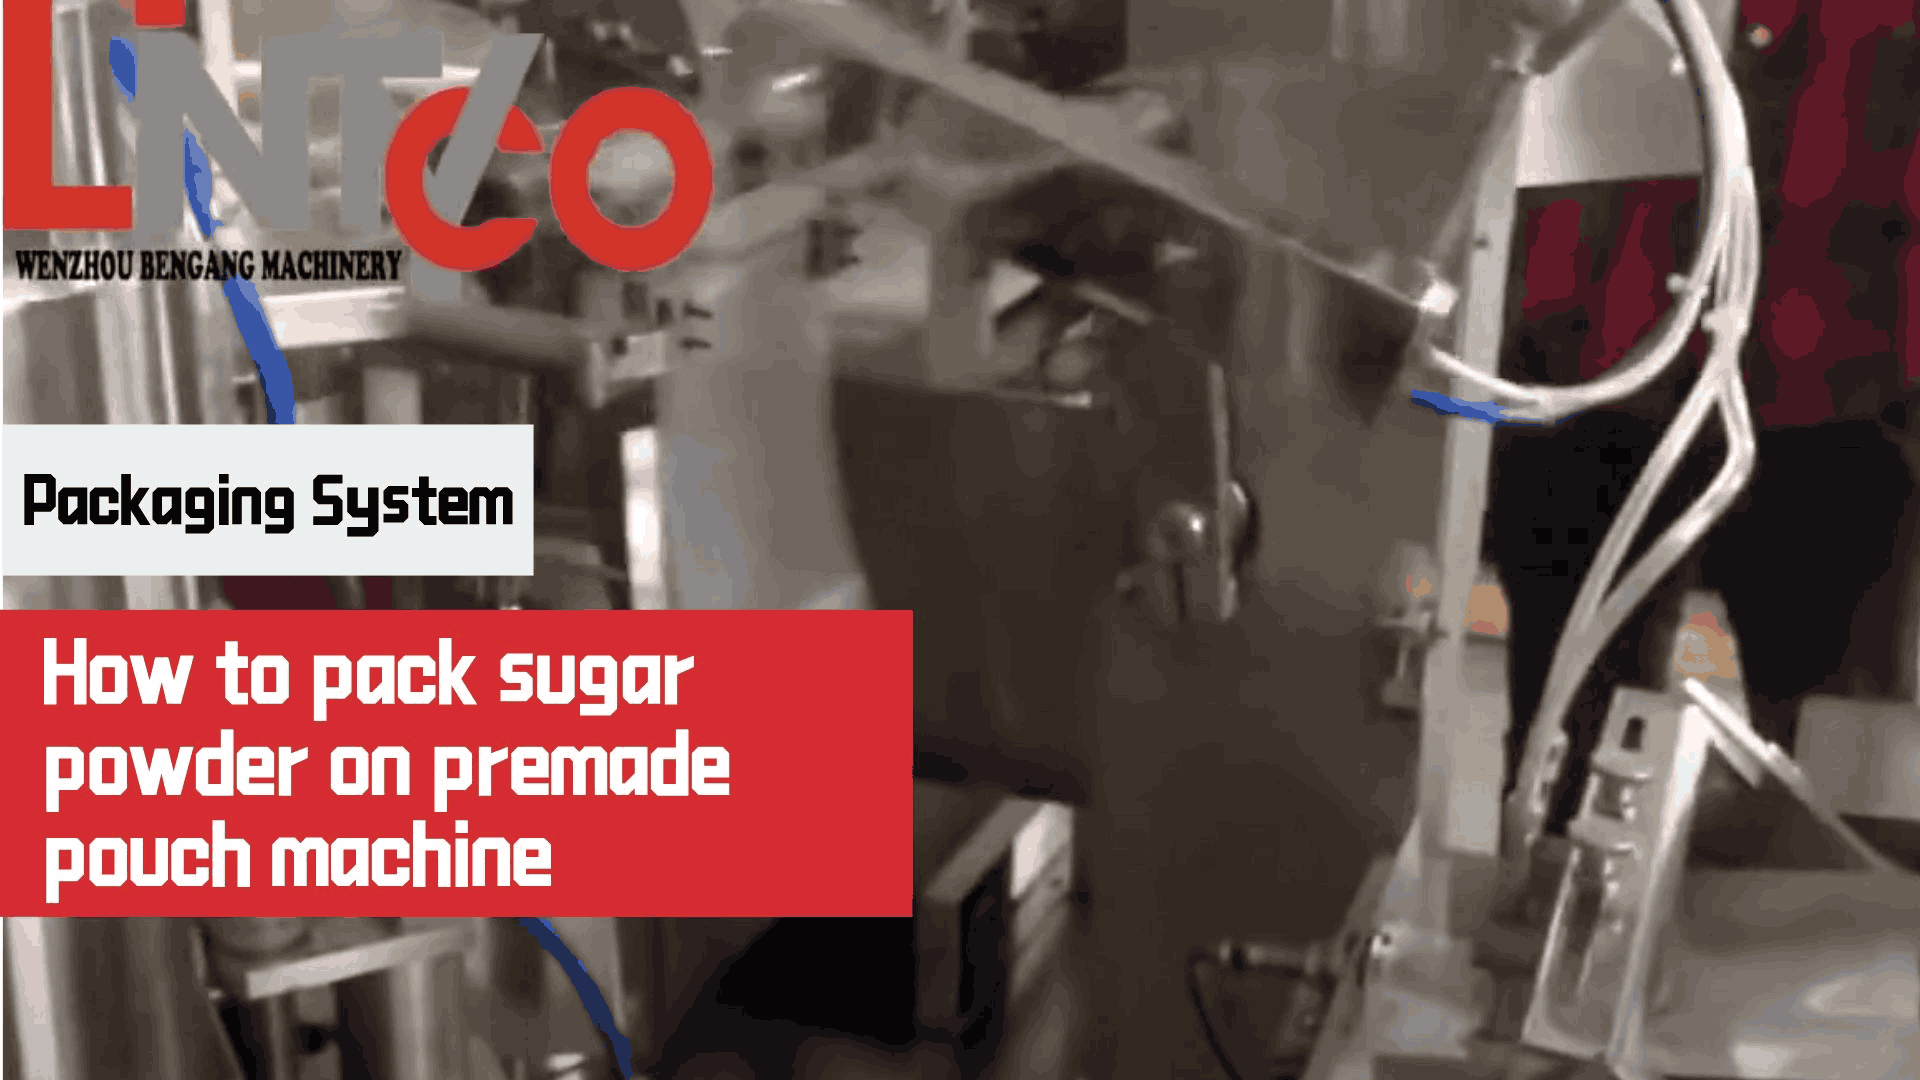 How to pack sugar powder on premade pouch machine